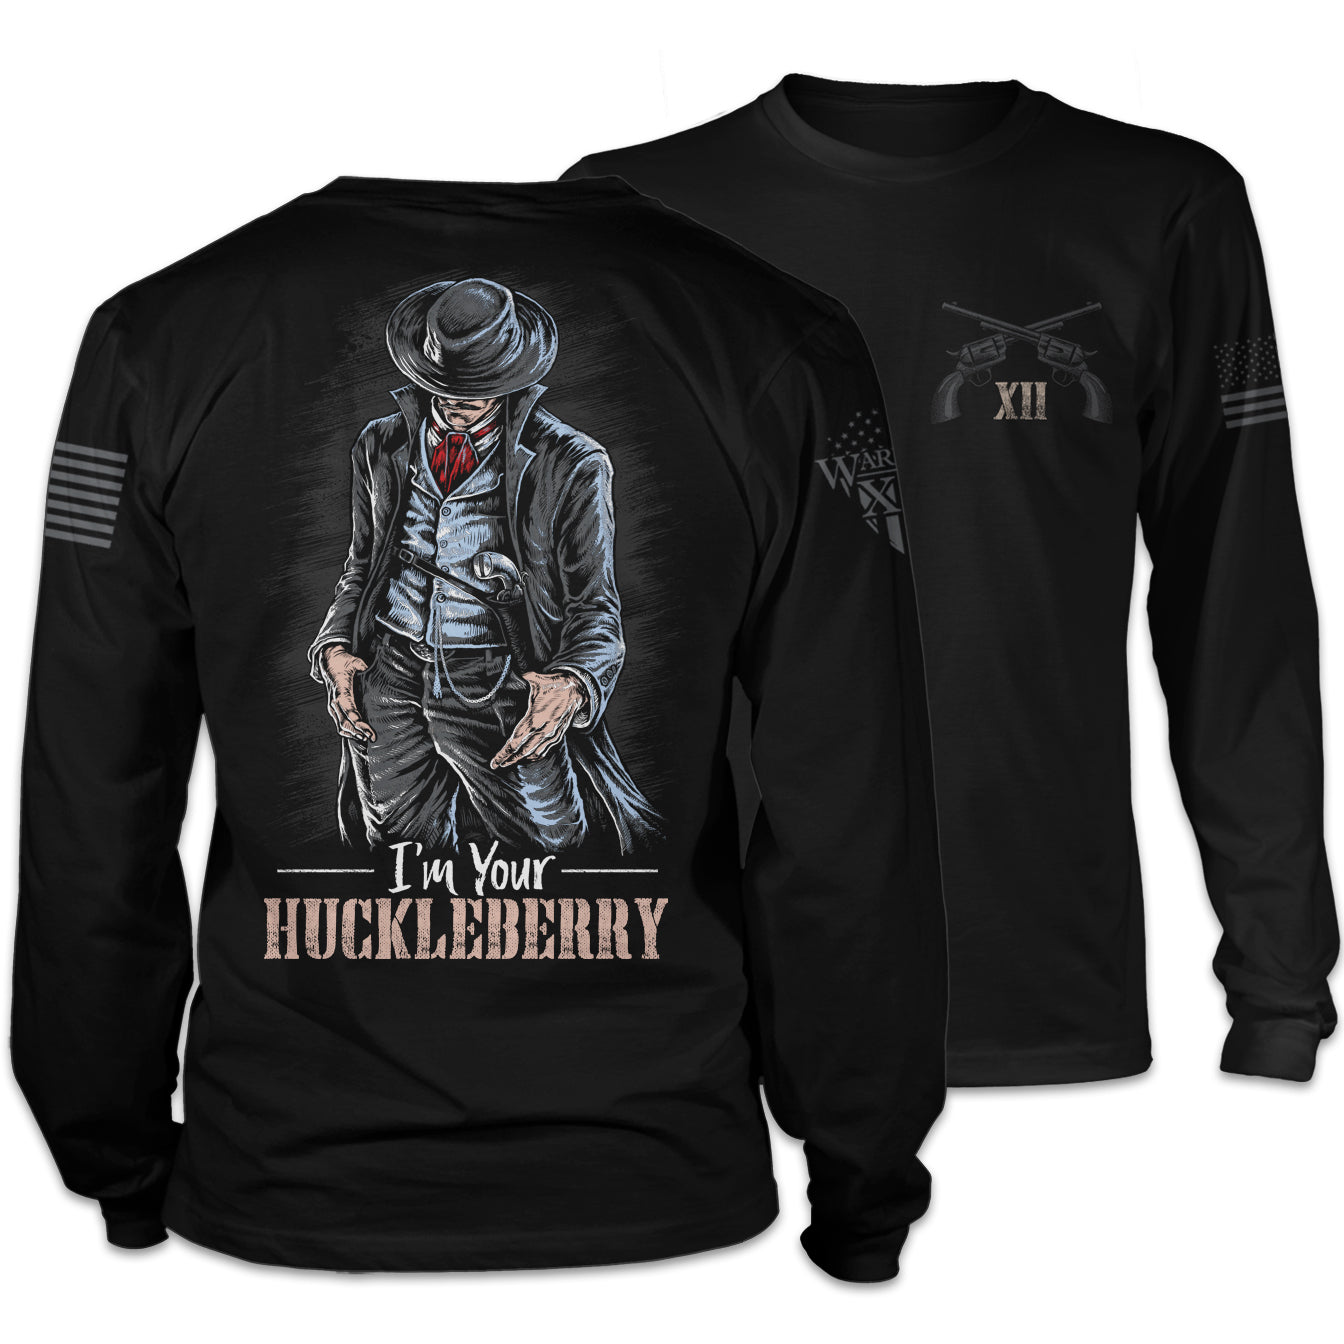 Front & back black long sleeve shirt with the words "I'm your Huckleberry" with a cowboy printed on the shirt.